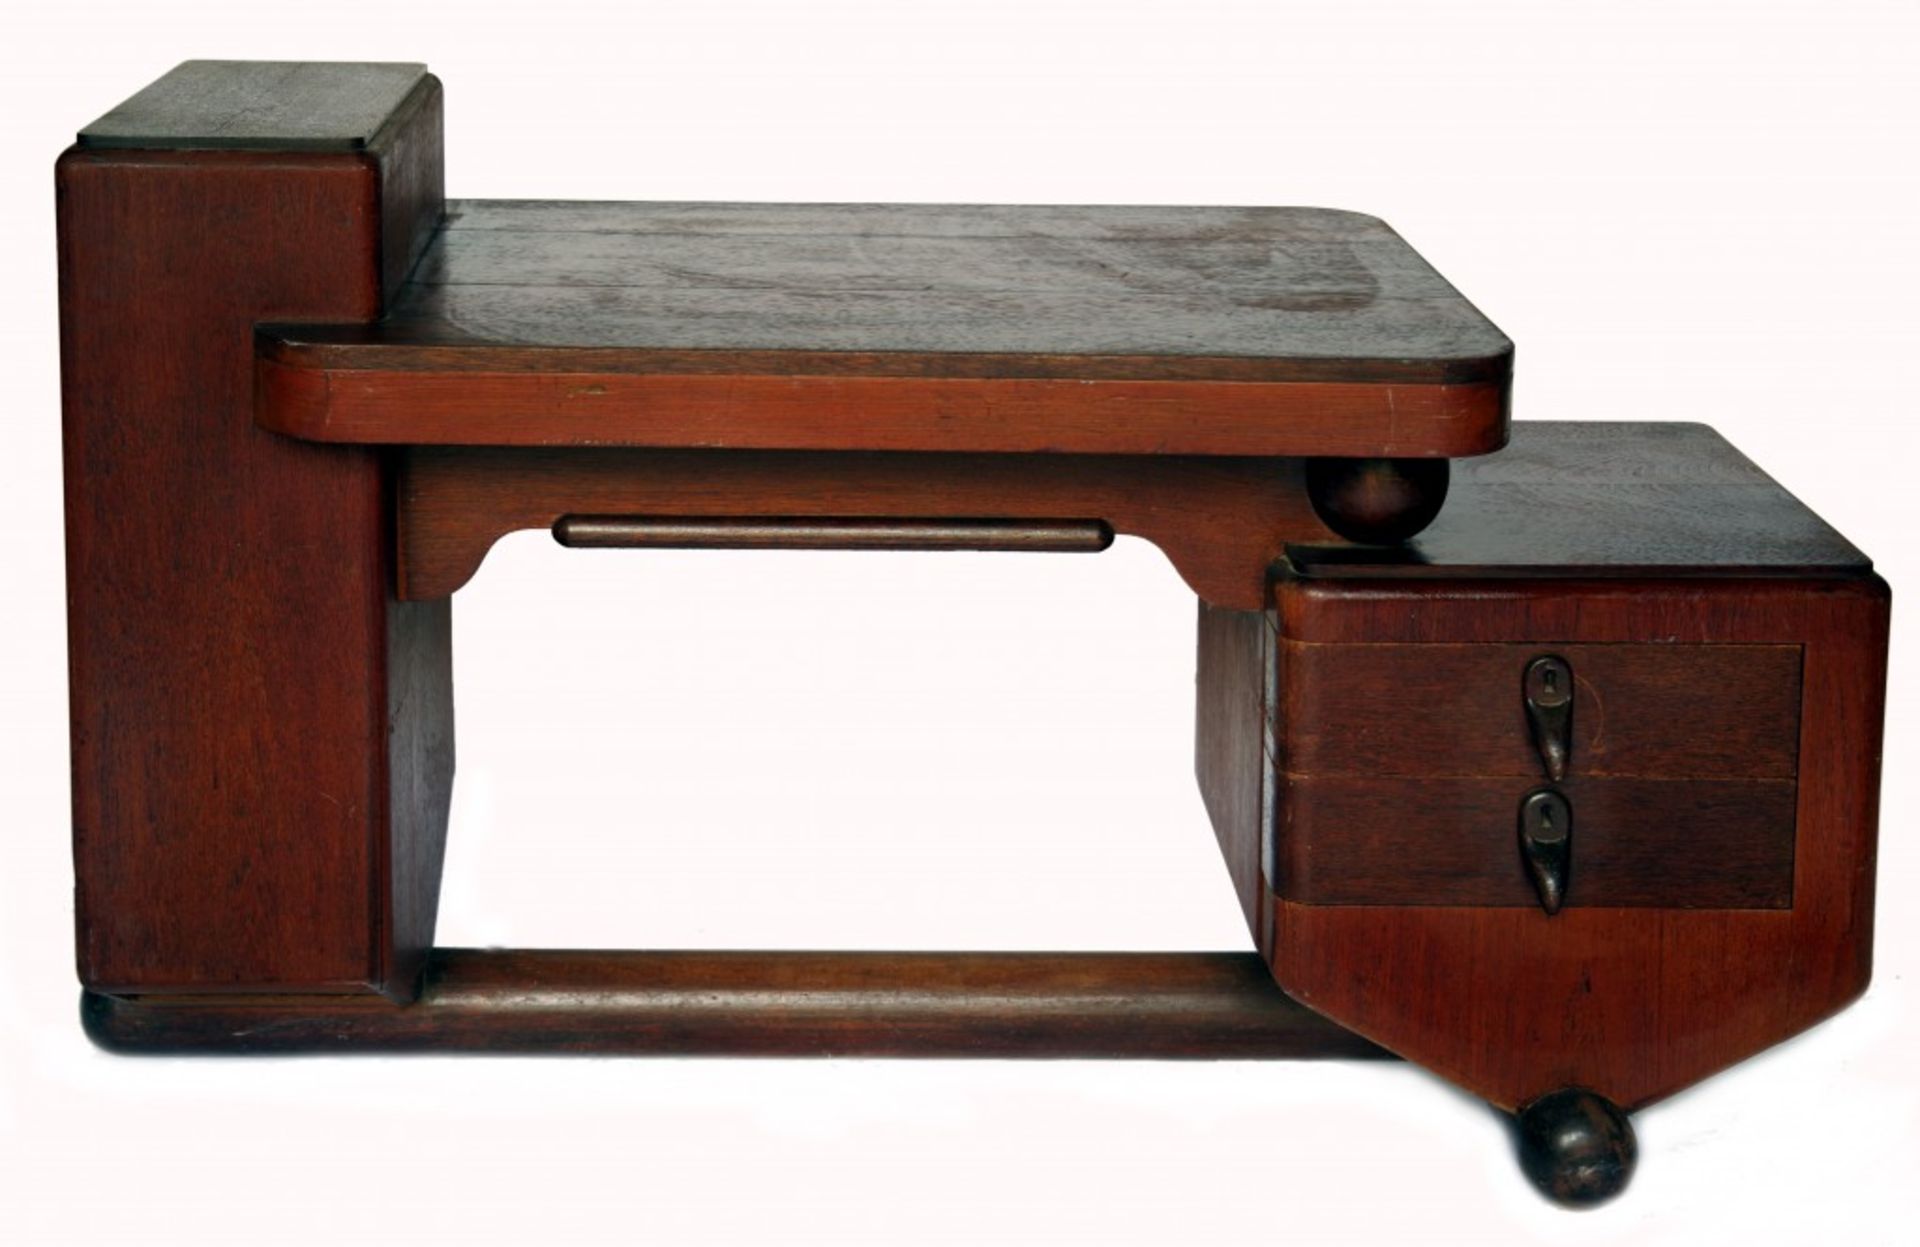 Rondo-Cubist Writing Desk with Chair - Image 2 of 5